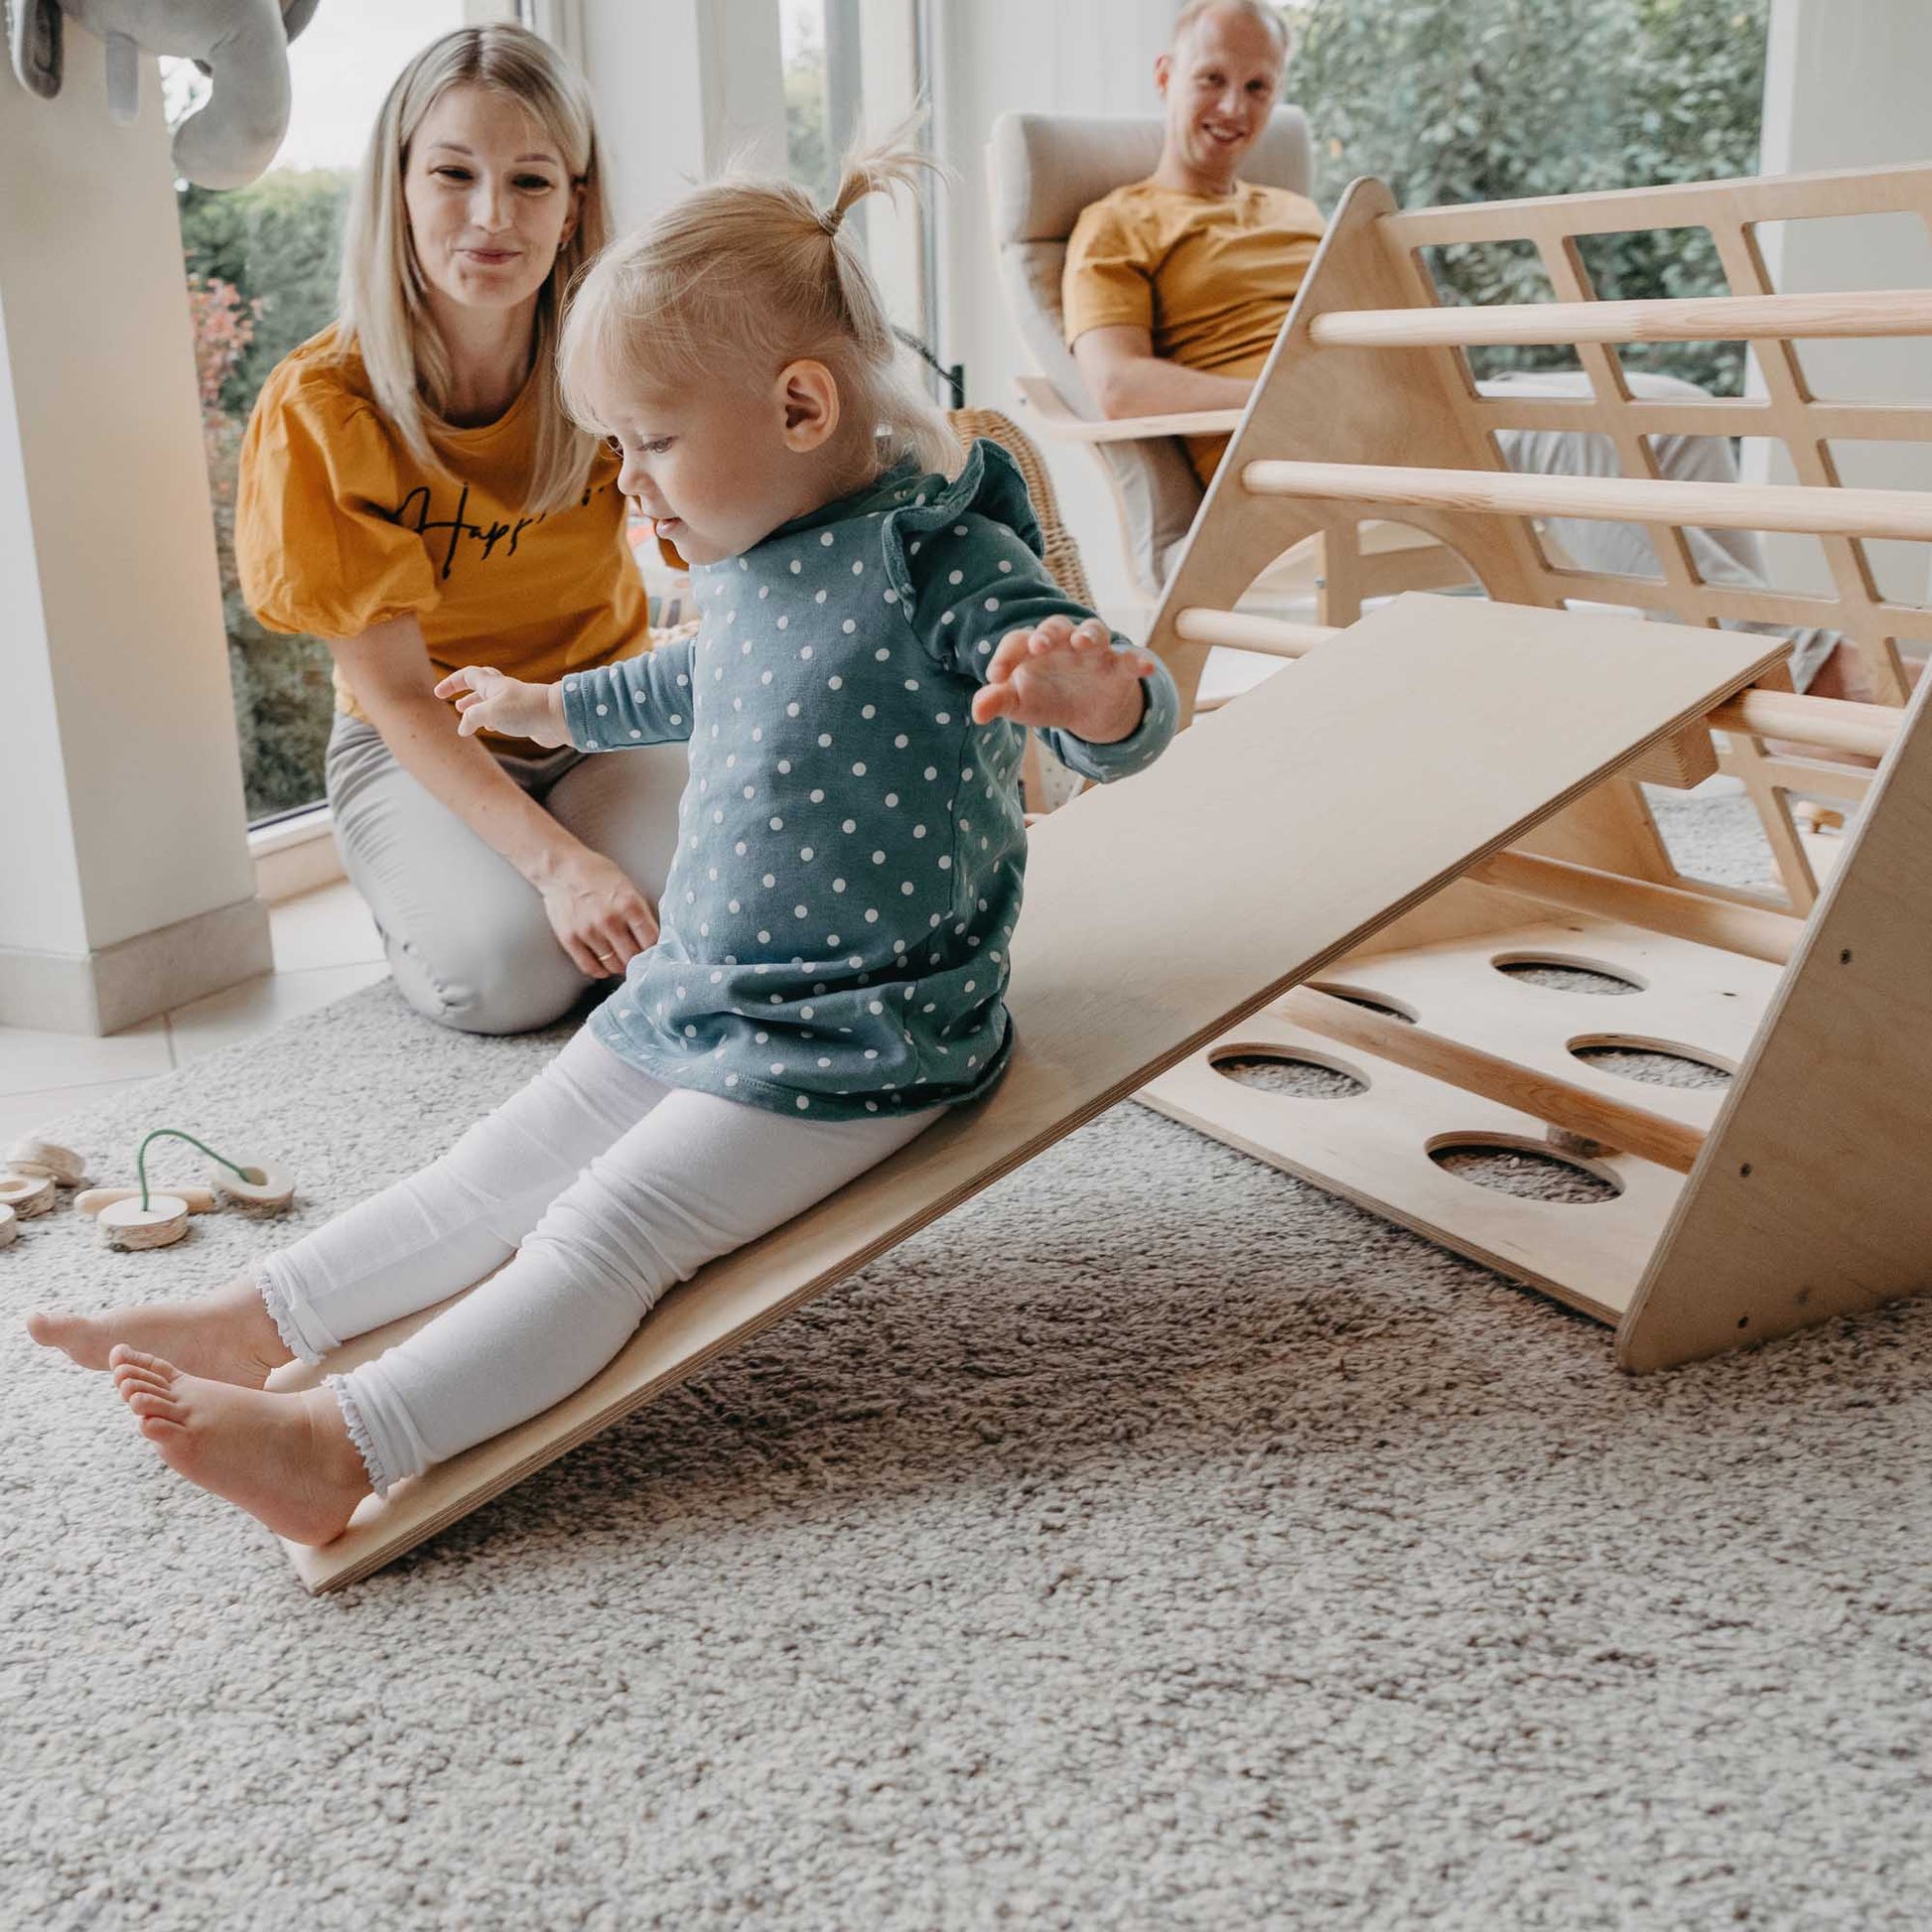 A child is enjoying playtime on a Climbing triangle + Foldable climbing triangle + a ramp in a living room.